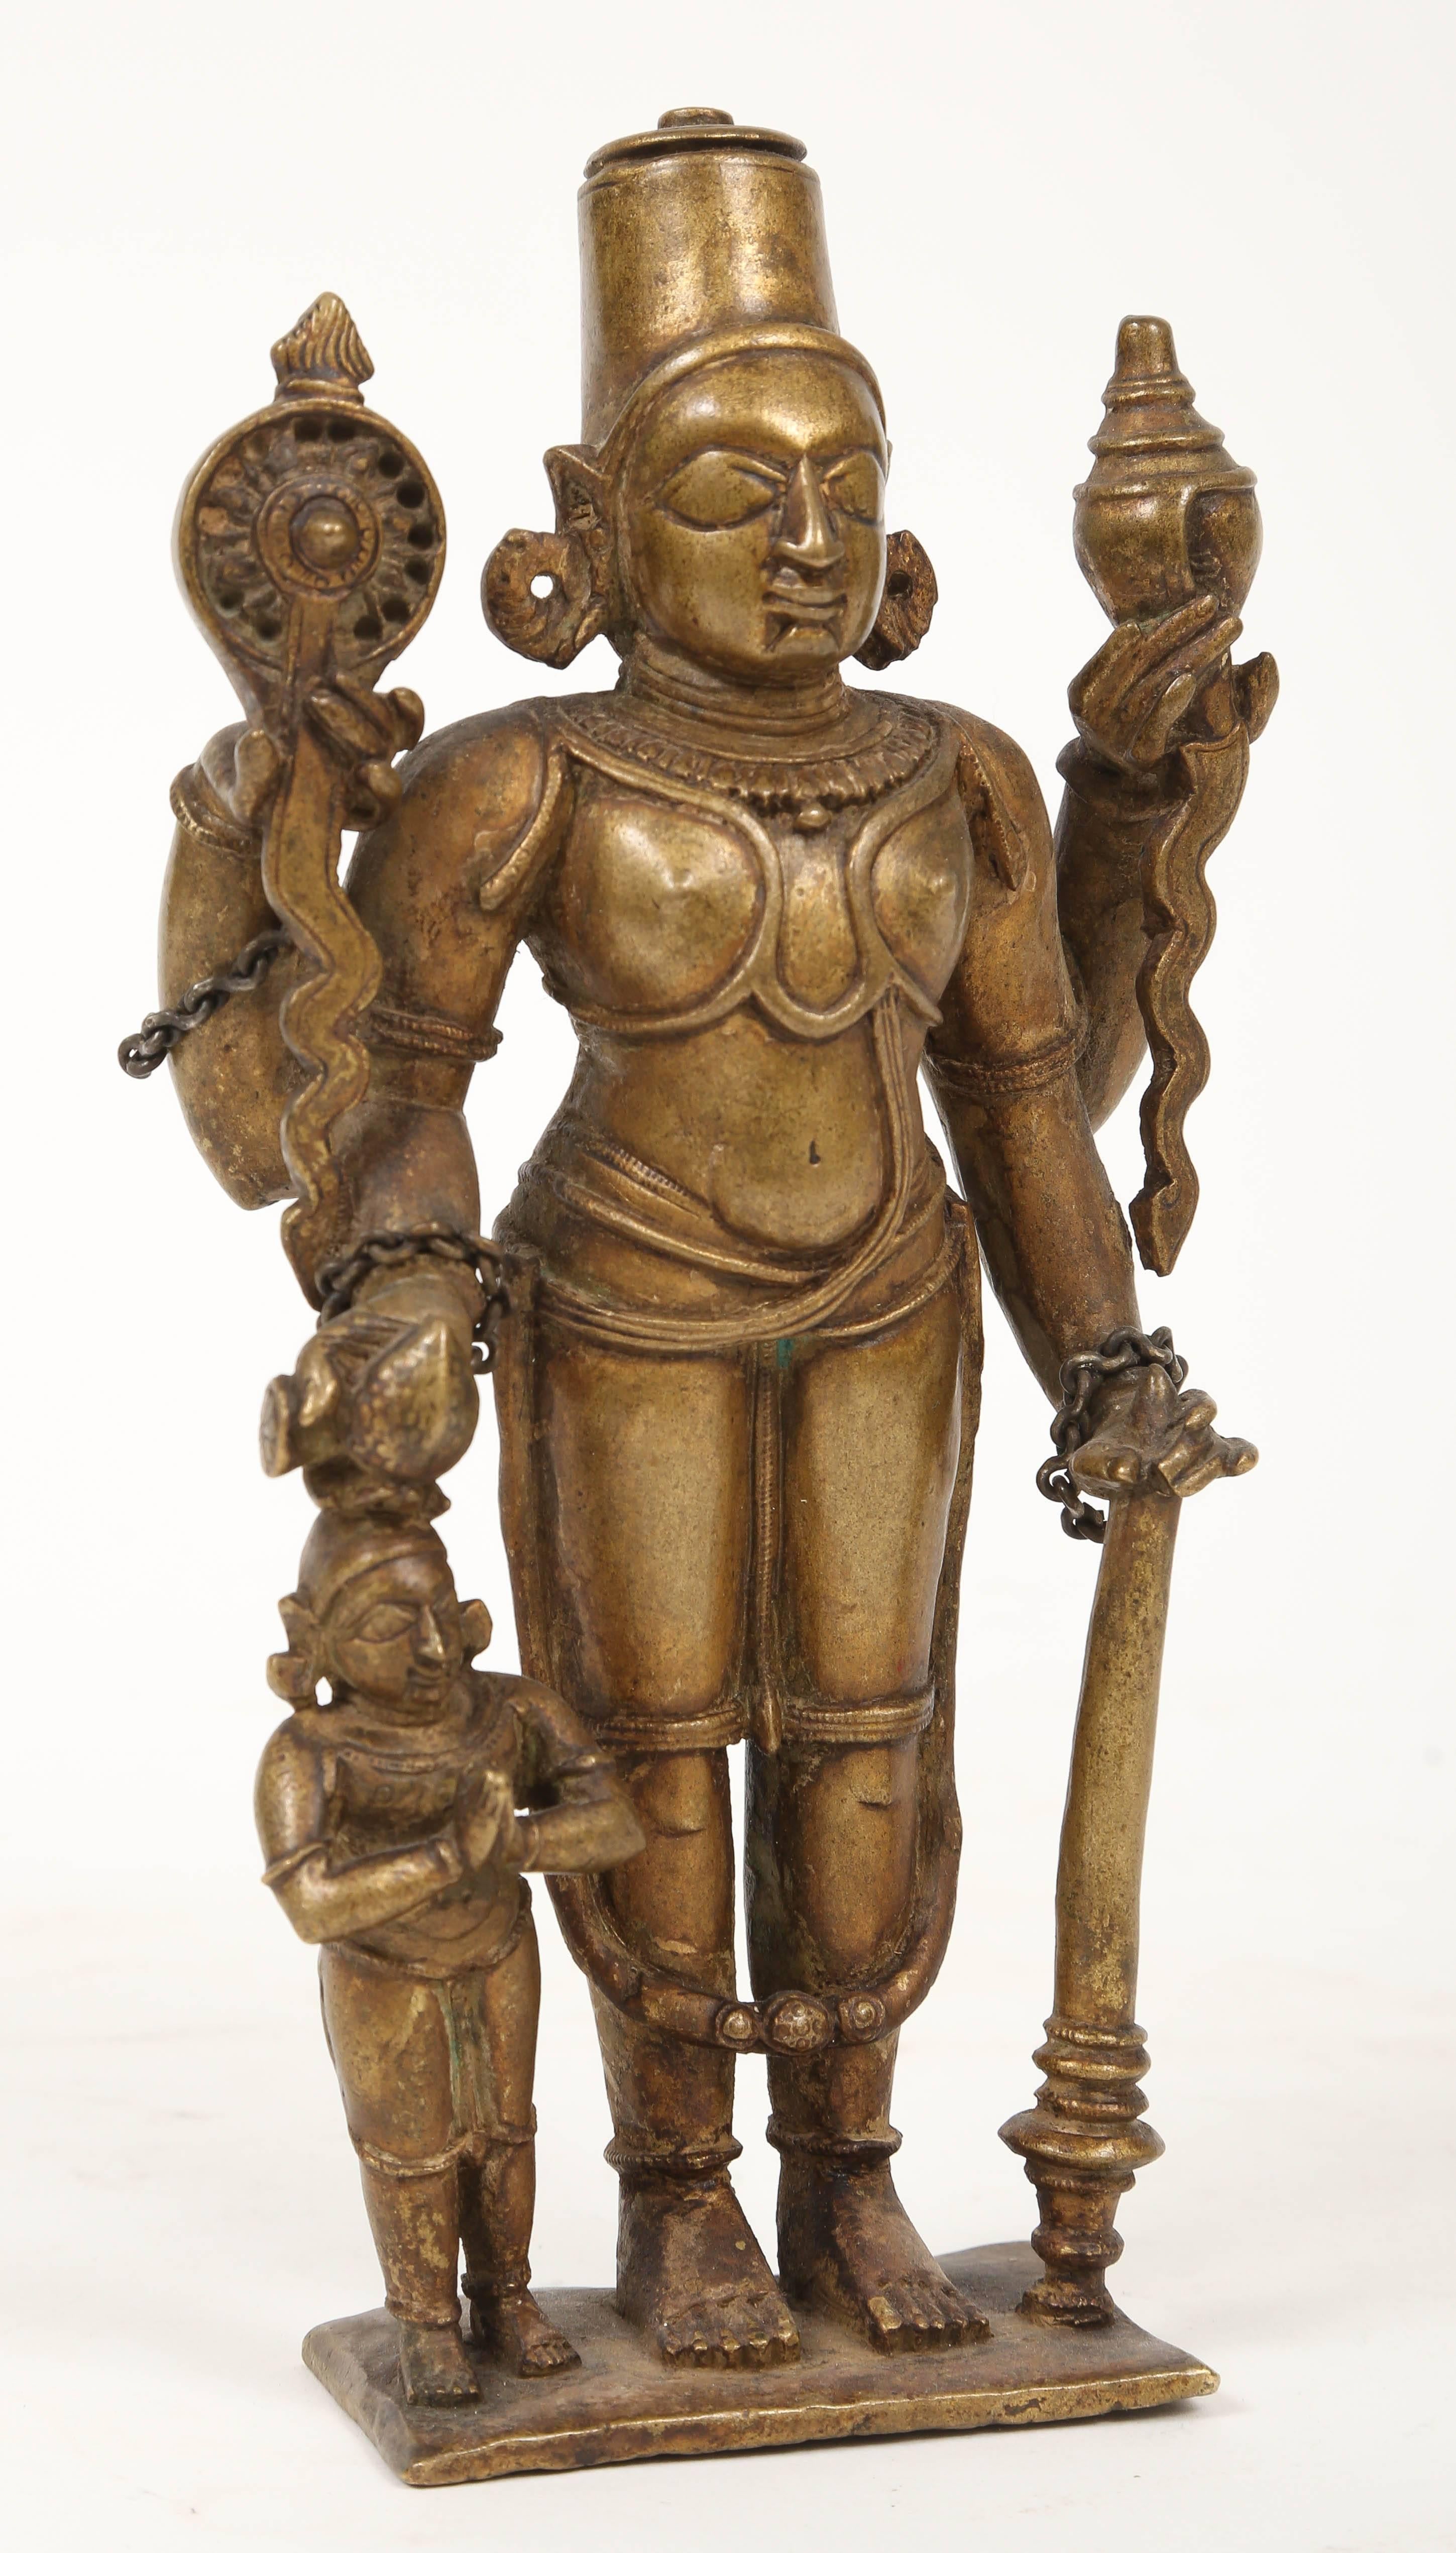 A four-armed depiction of the Lord Vishnu holding the discus and the conch in the rear hands of the upraised arms. The deity wears a high crown and has earrings and bracelets. A long heavy dhoti falls from the belt below the slender waist almost to